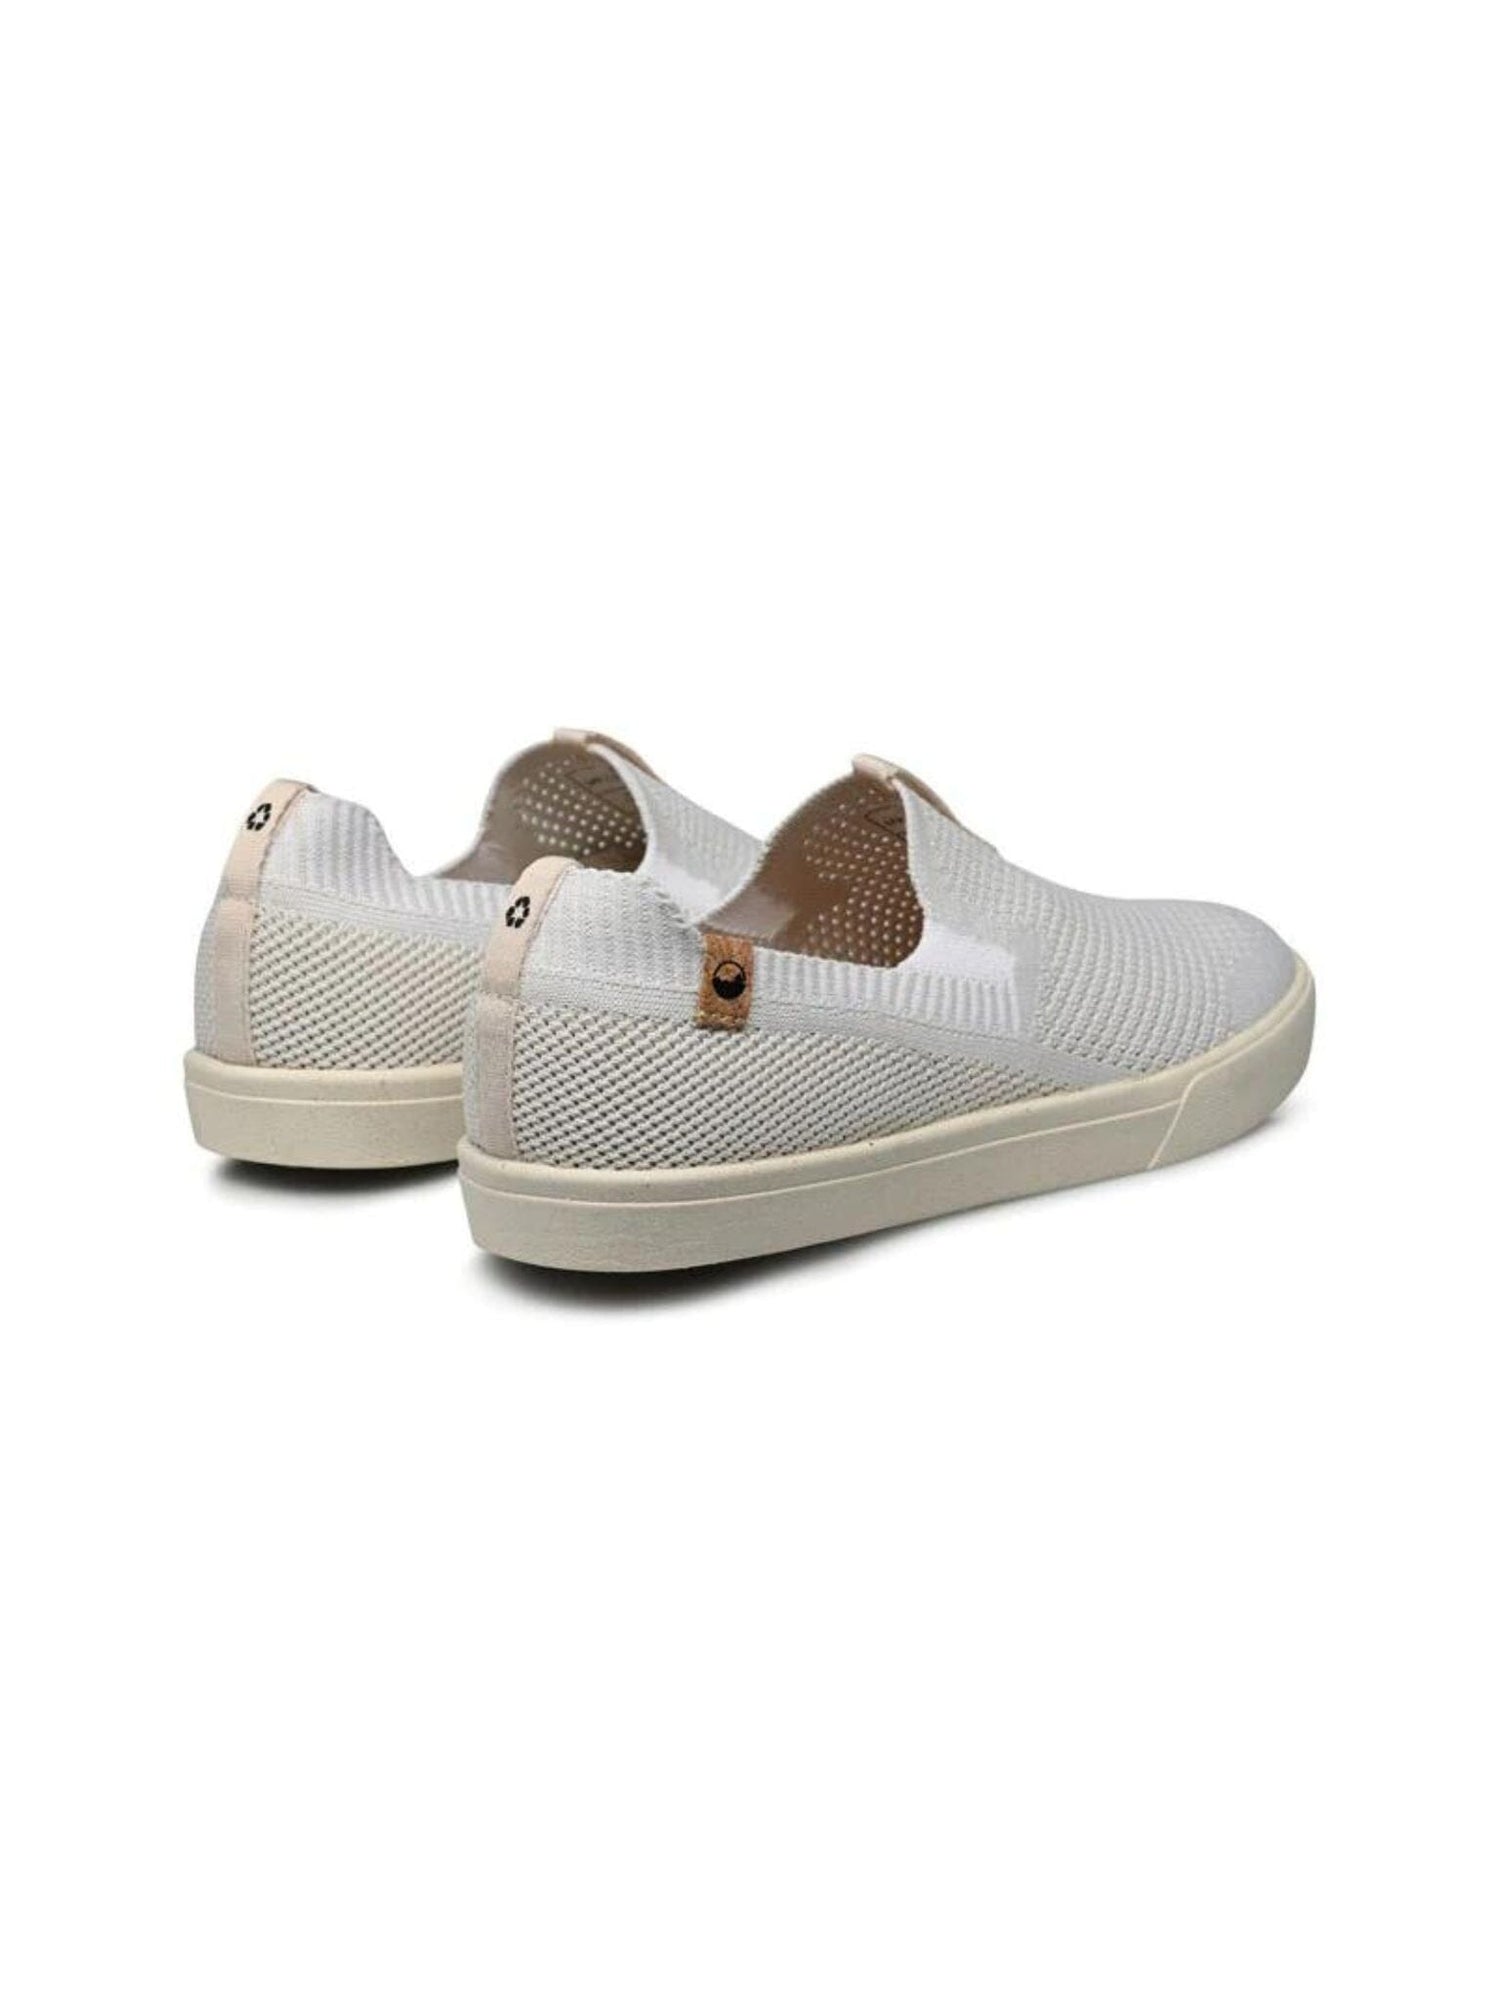 Saola W's Virunga - Recycled Polyester White Shoes